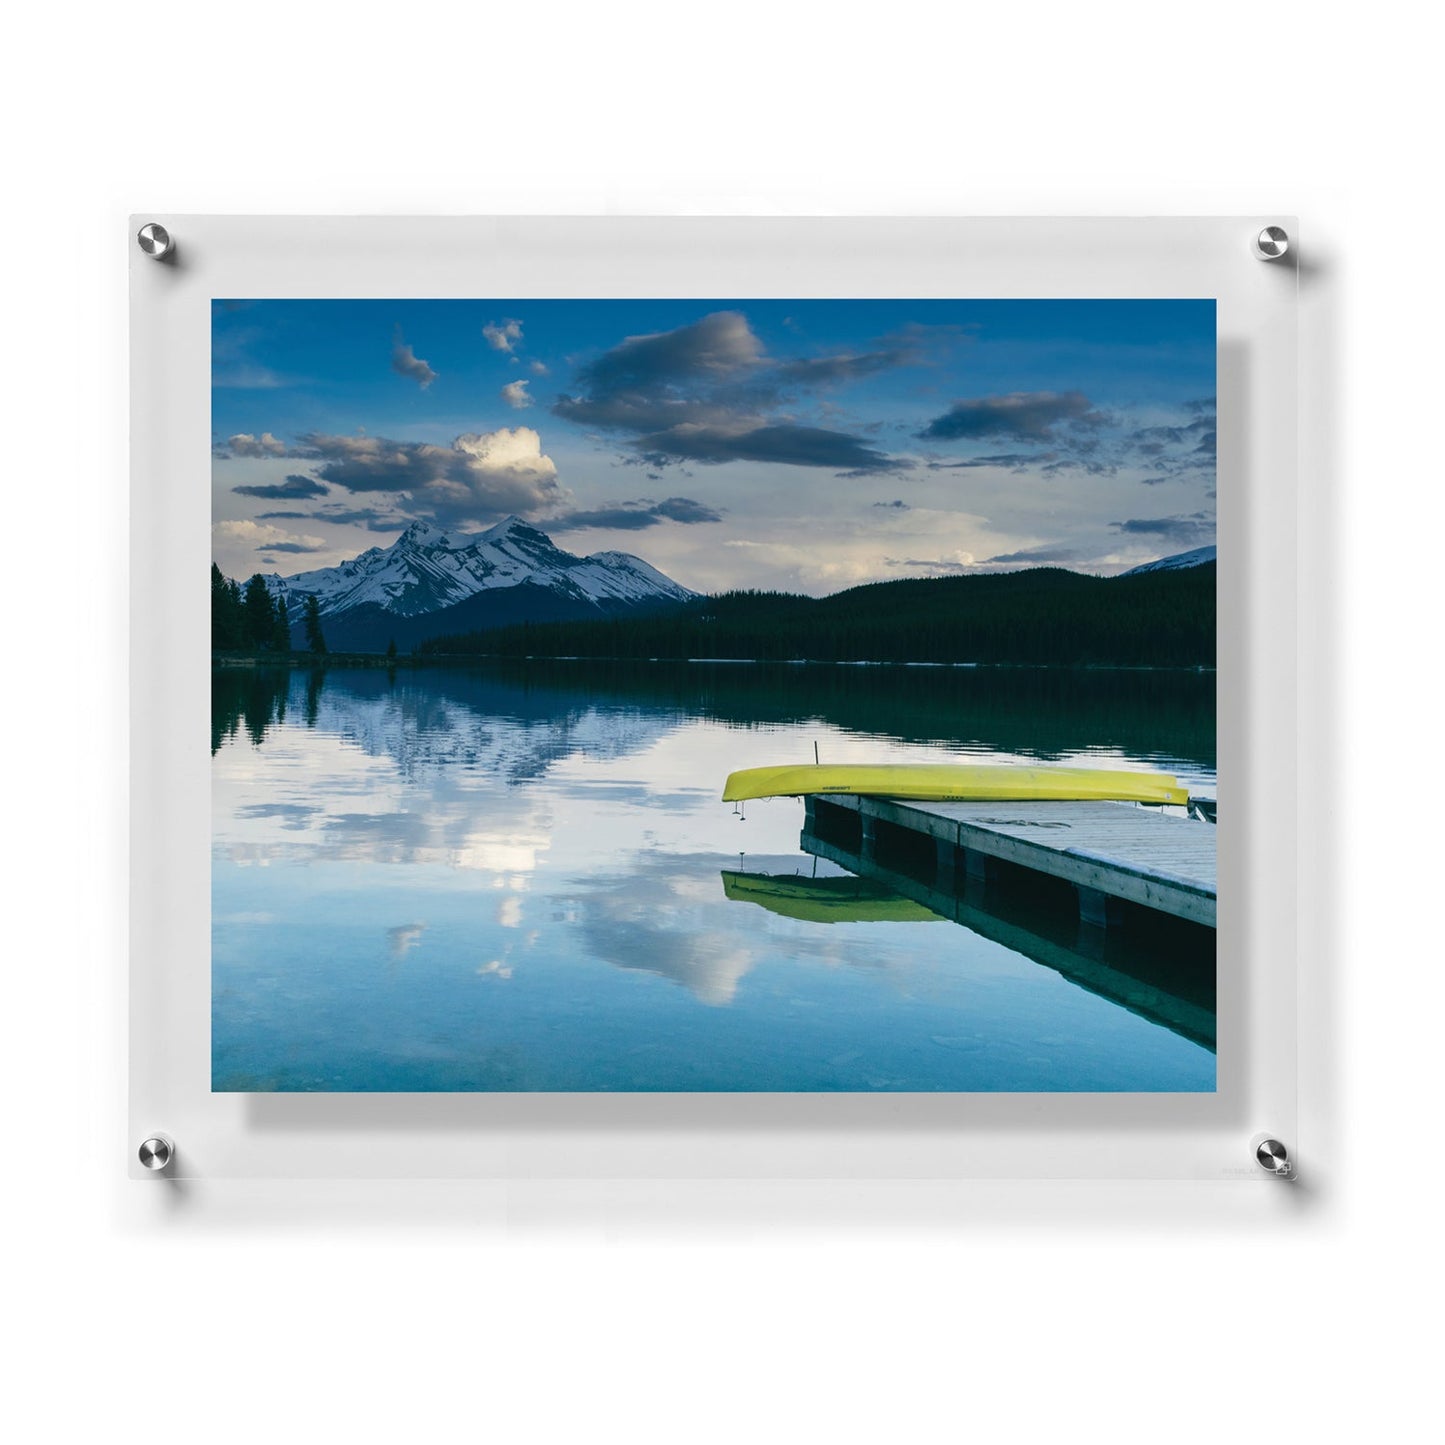 WS Double: 23" x 27" Double Panel Frame